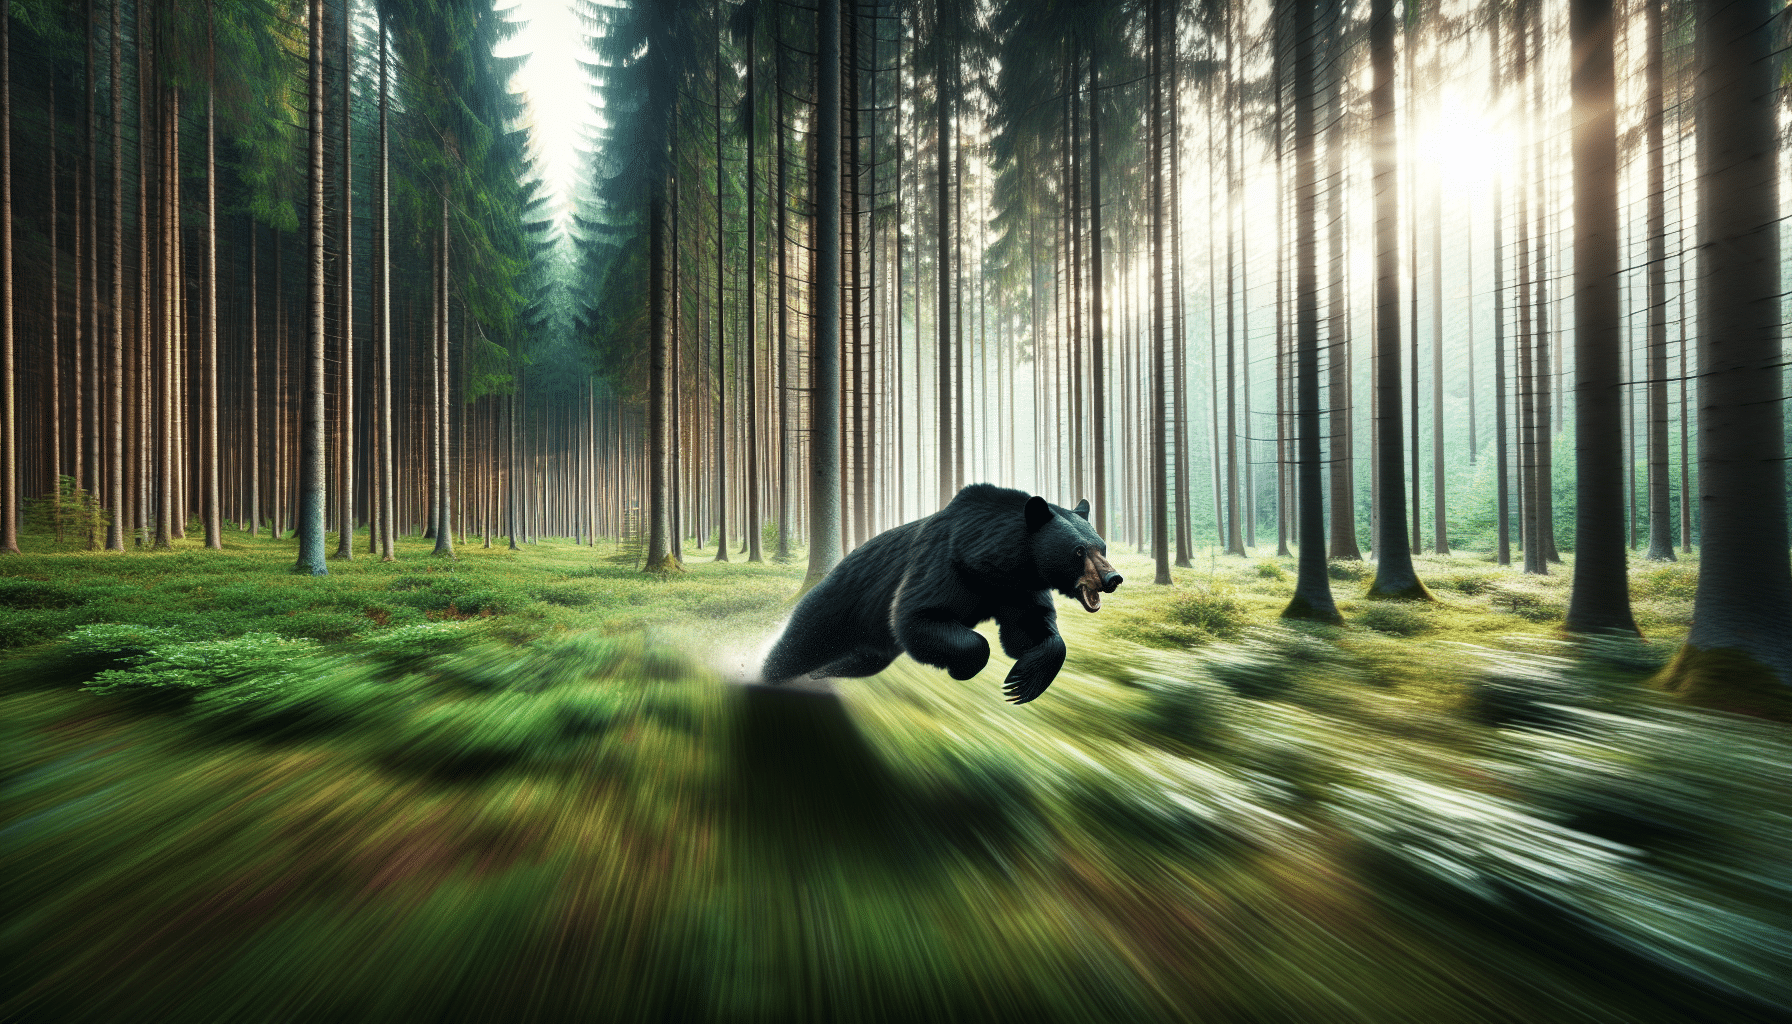 A view of a forest with tall coniferous trees emerging from the lush green undergrowth. In the center, a Black Bear is in full sprint, demonstrating its speed. The bear's powerful muscles are visible as it propels itself forward, and there's a blur in the background to illustrate its rapid movement. There are no people, brand names, logos, or text in this scene.